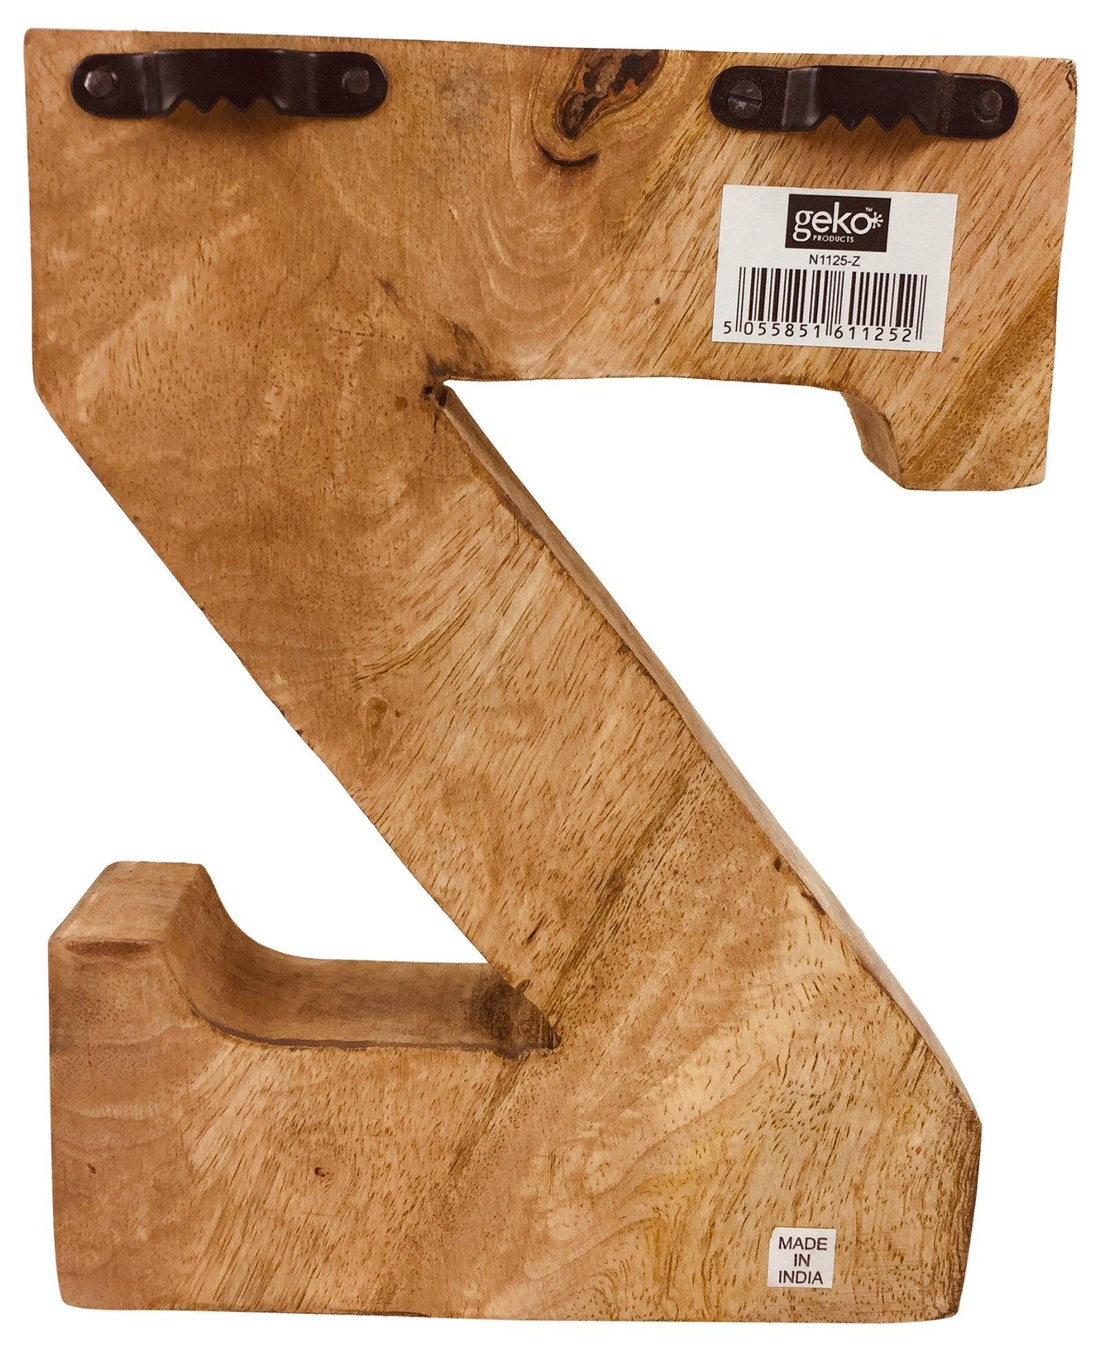 Hand Carved Wooden Embossed Letter Z - £18.99 - Single Letters 